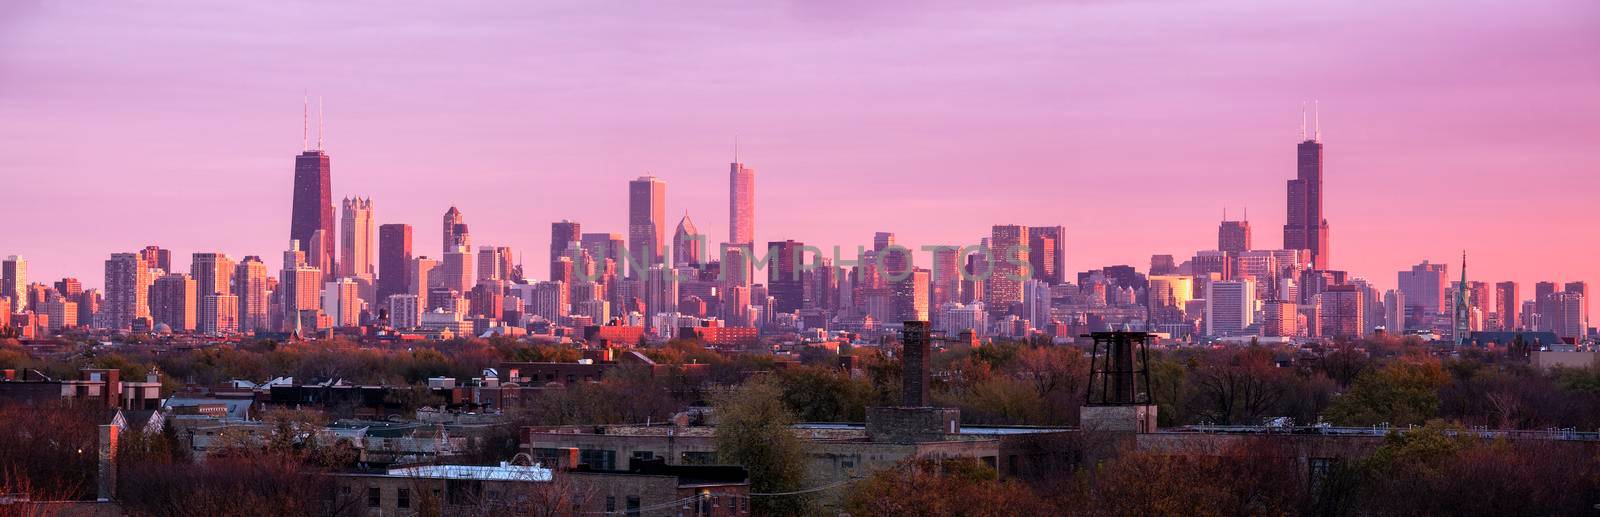 Colorful sunset in Chicago - panoramic view. Chicago, Illinois, USA.